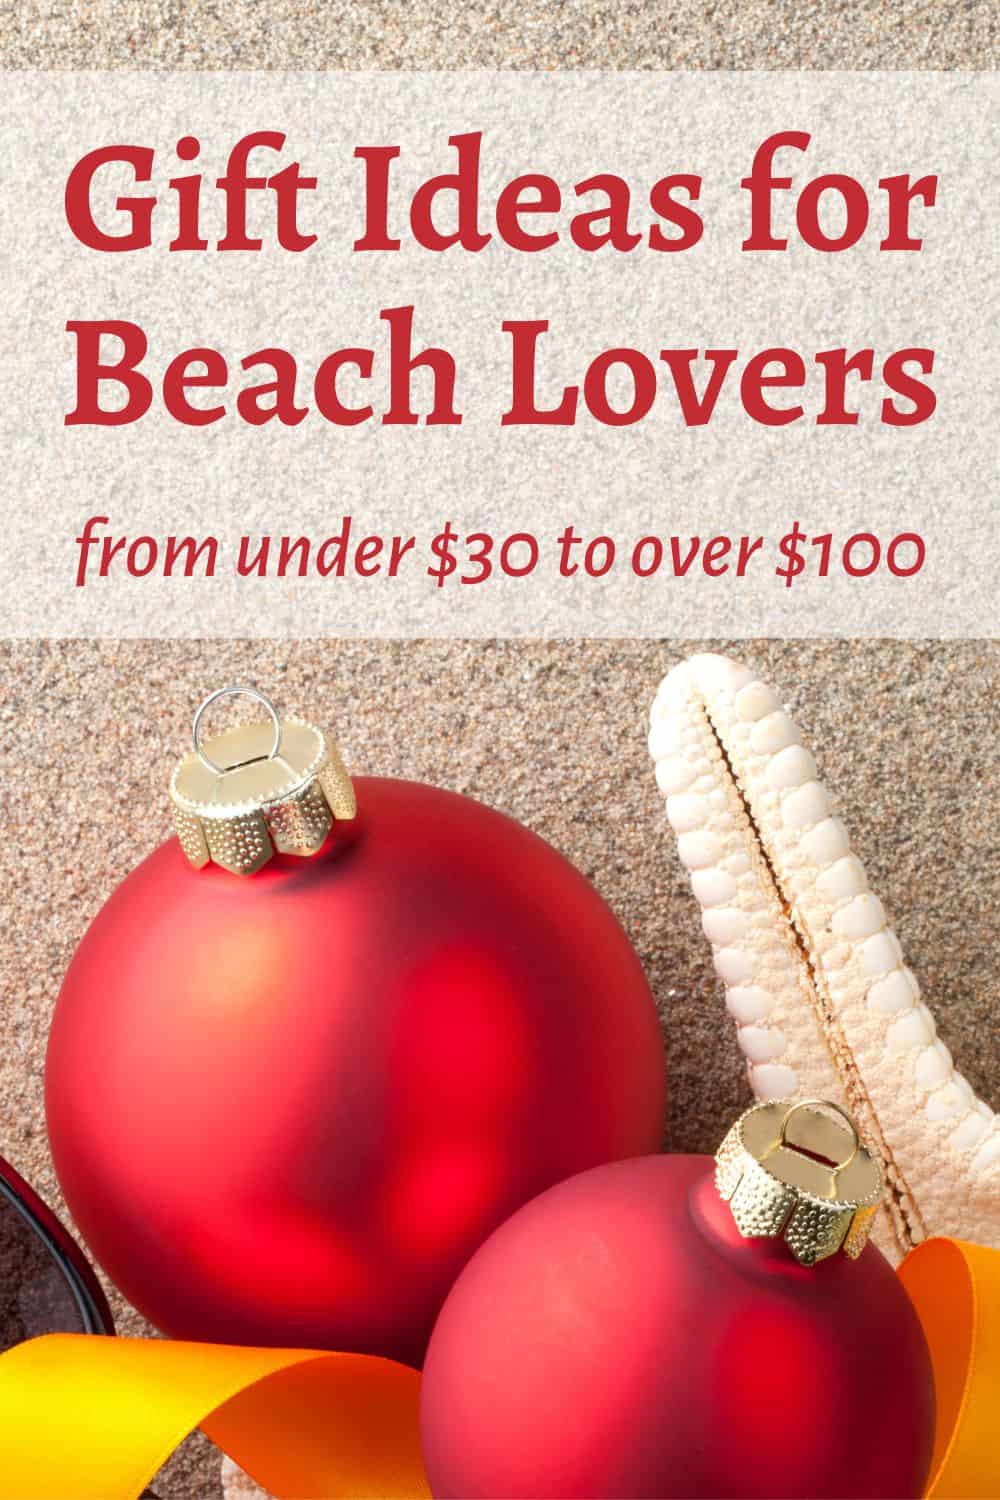 Gift Ideas for Beach Lovers